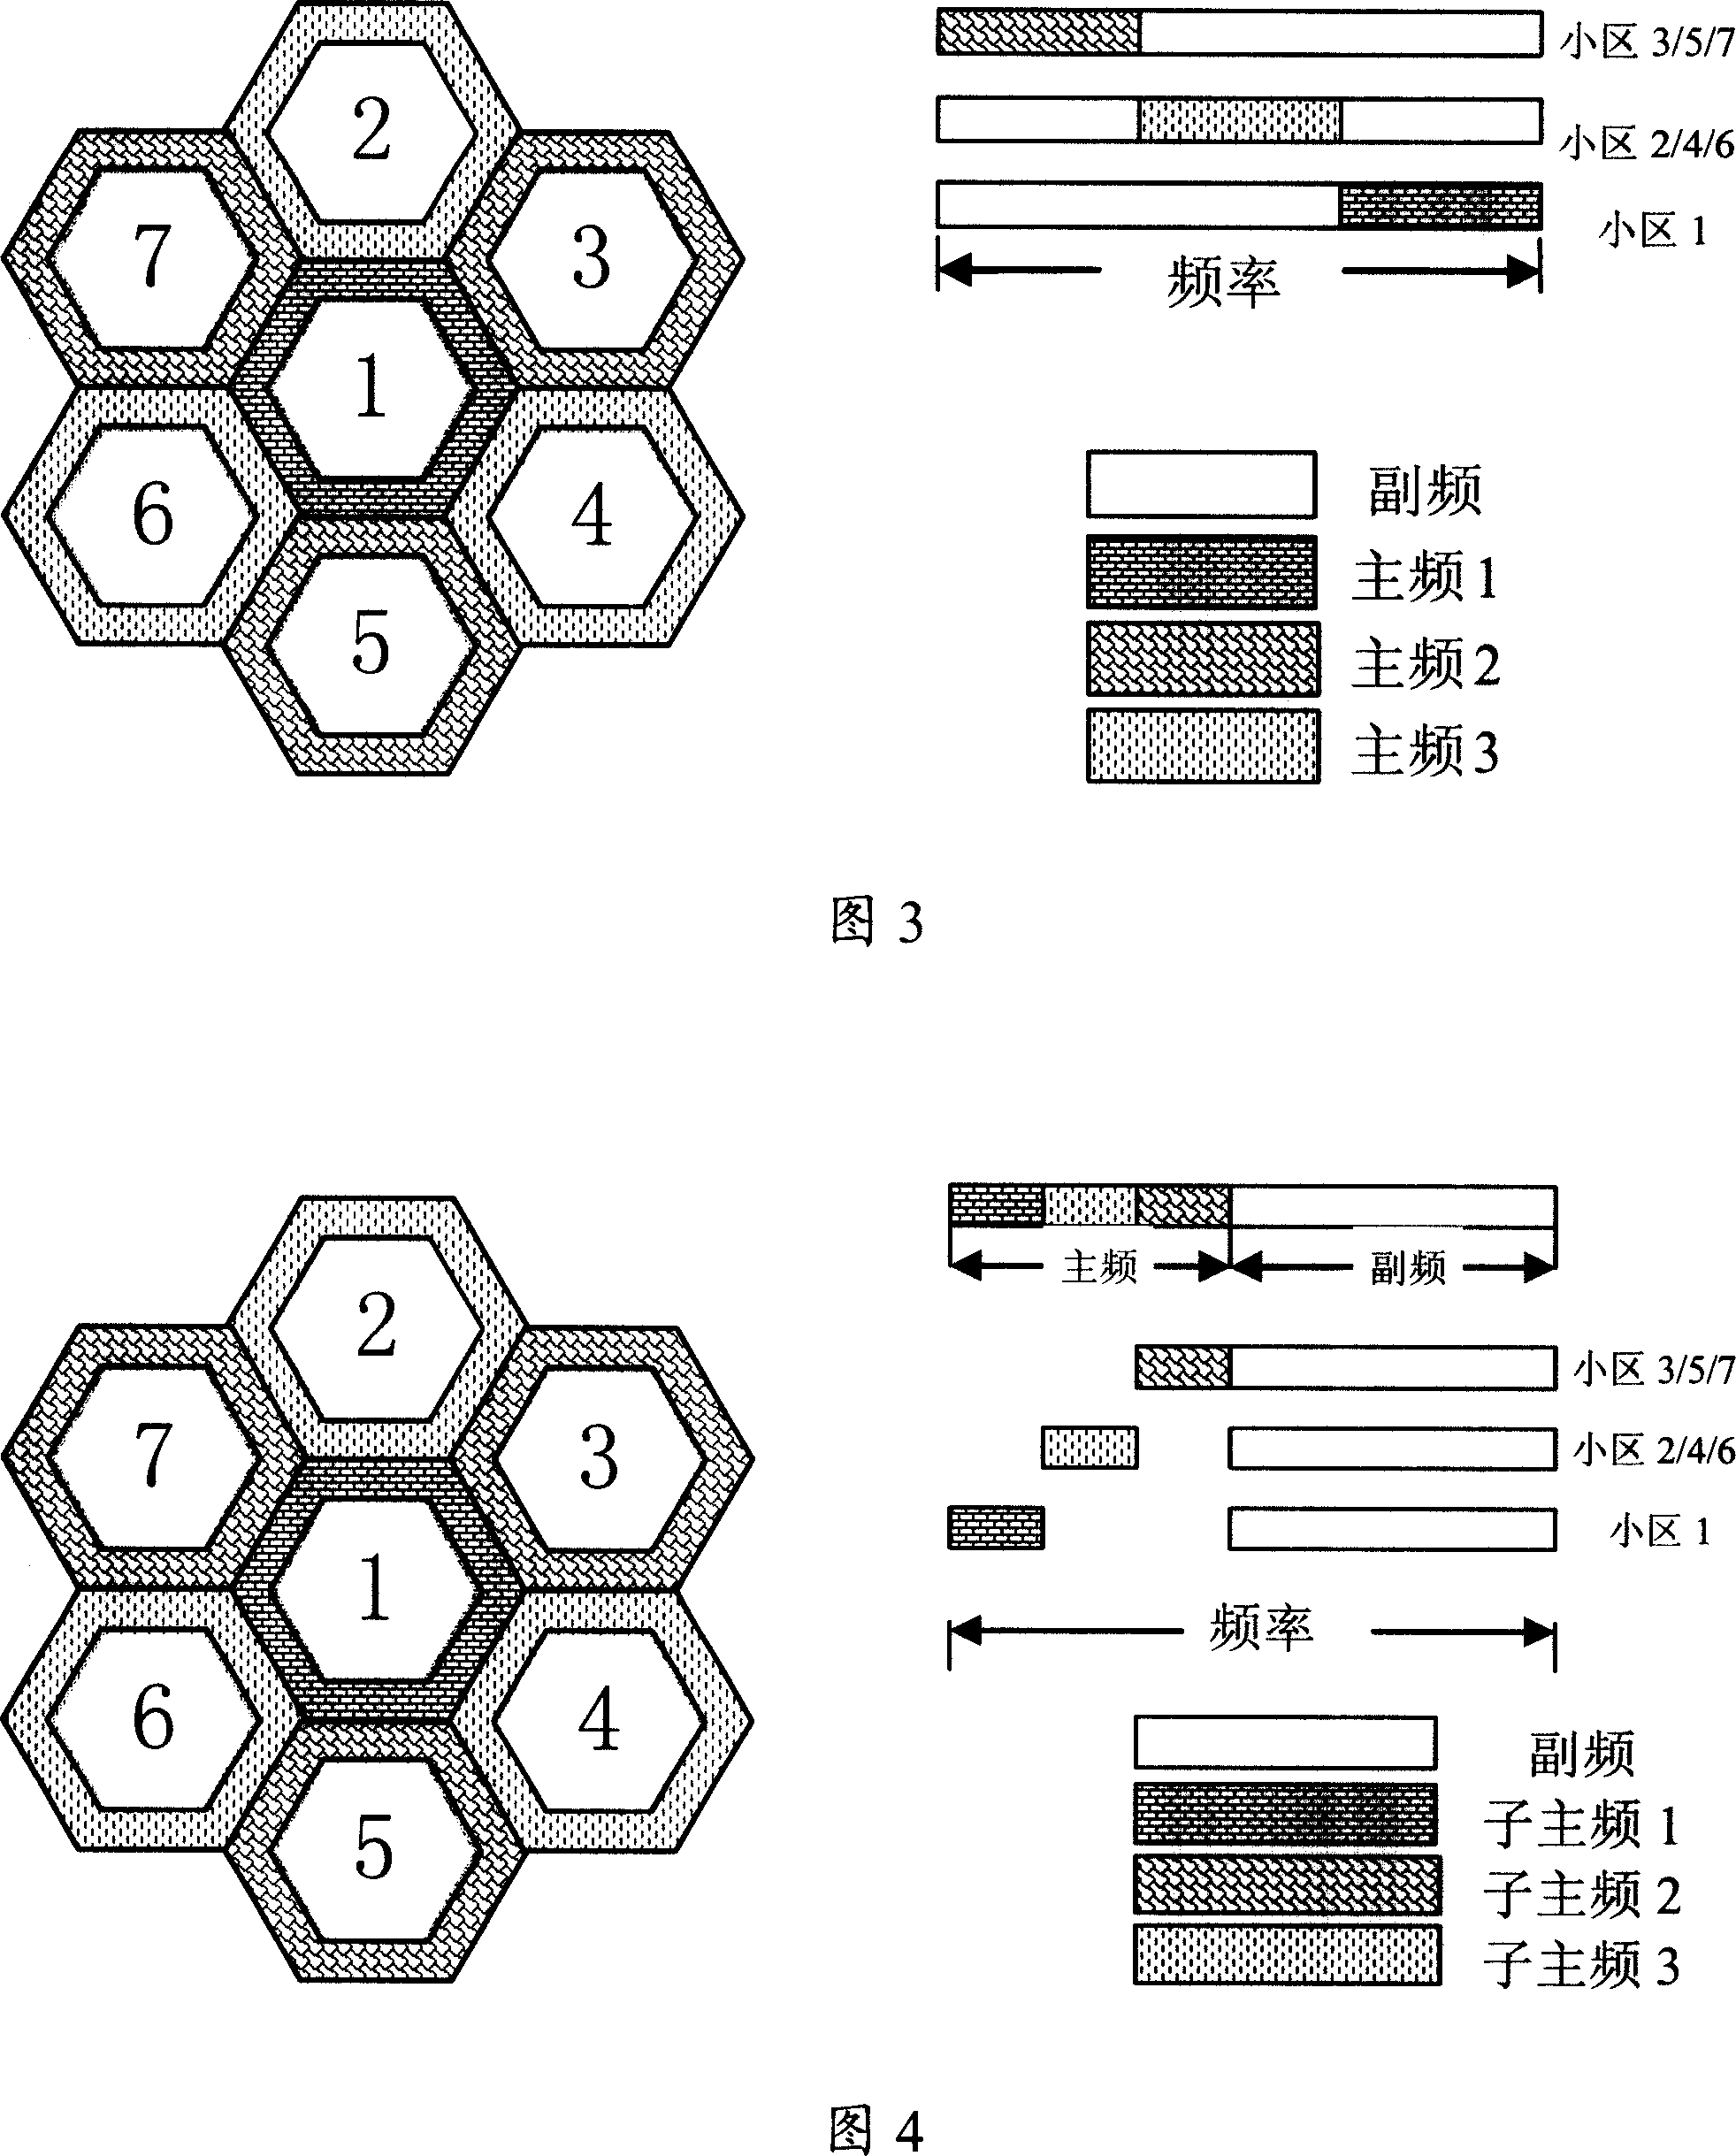 Frequency soft multiplexing system and method